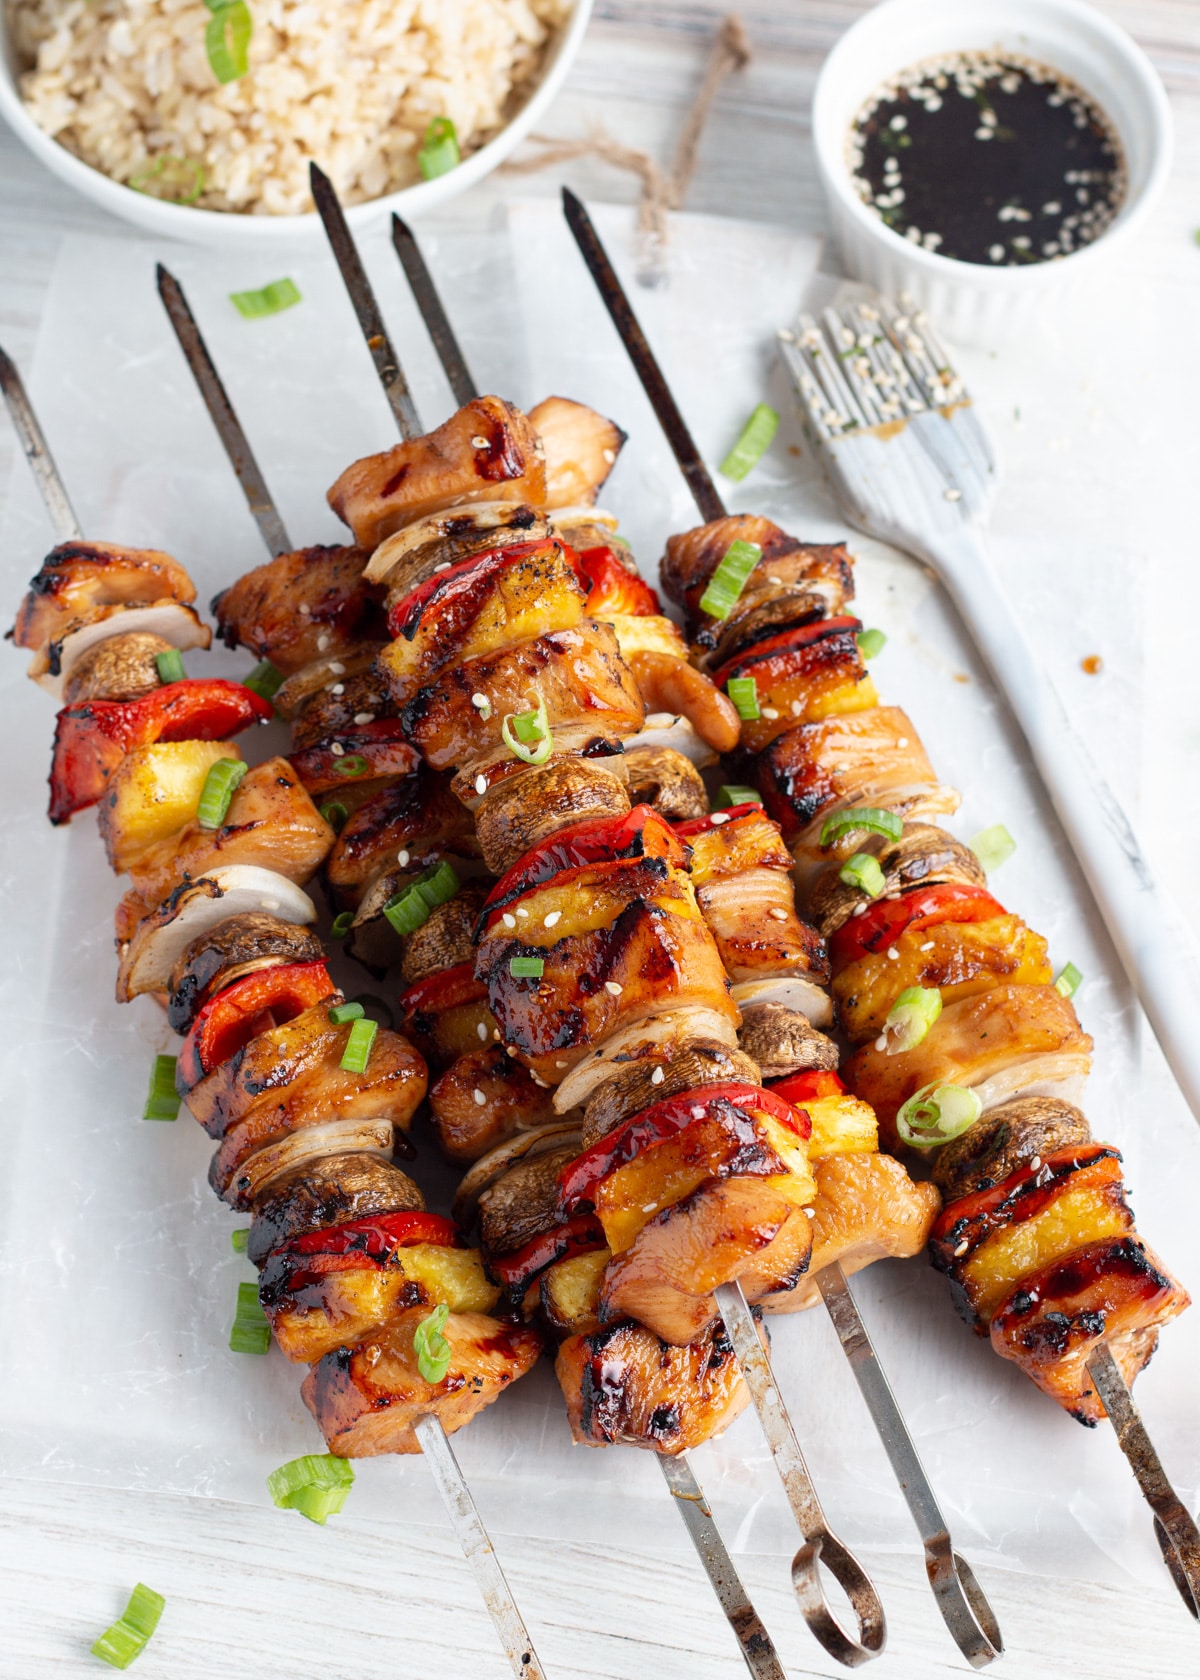 Picture of cooked skewers with chicken, pineapple, mushrooms, onion and peppers.